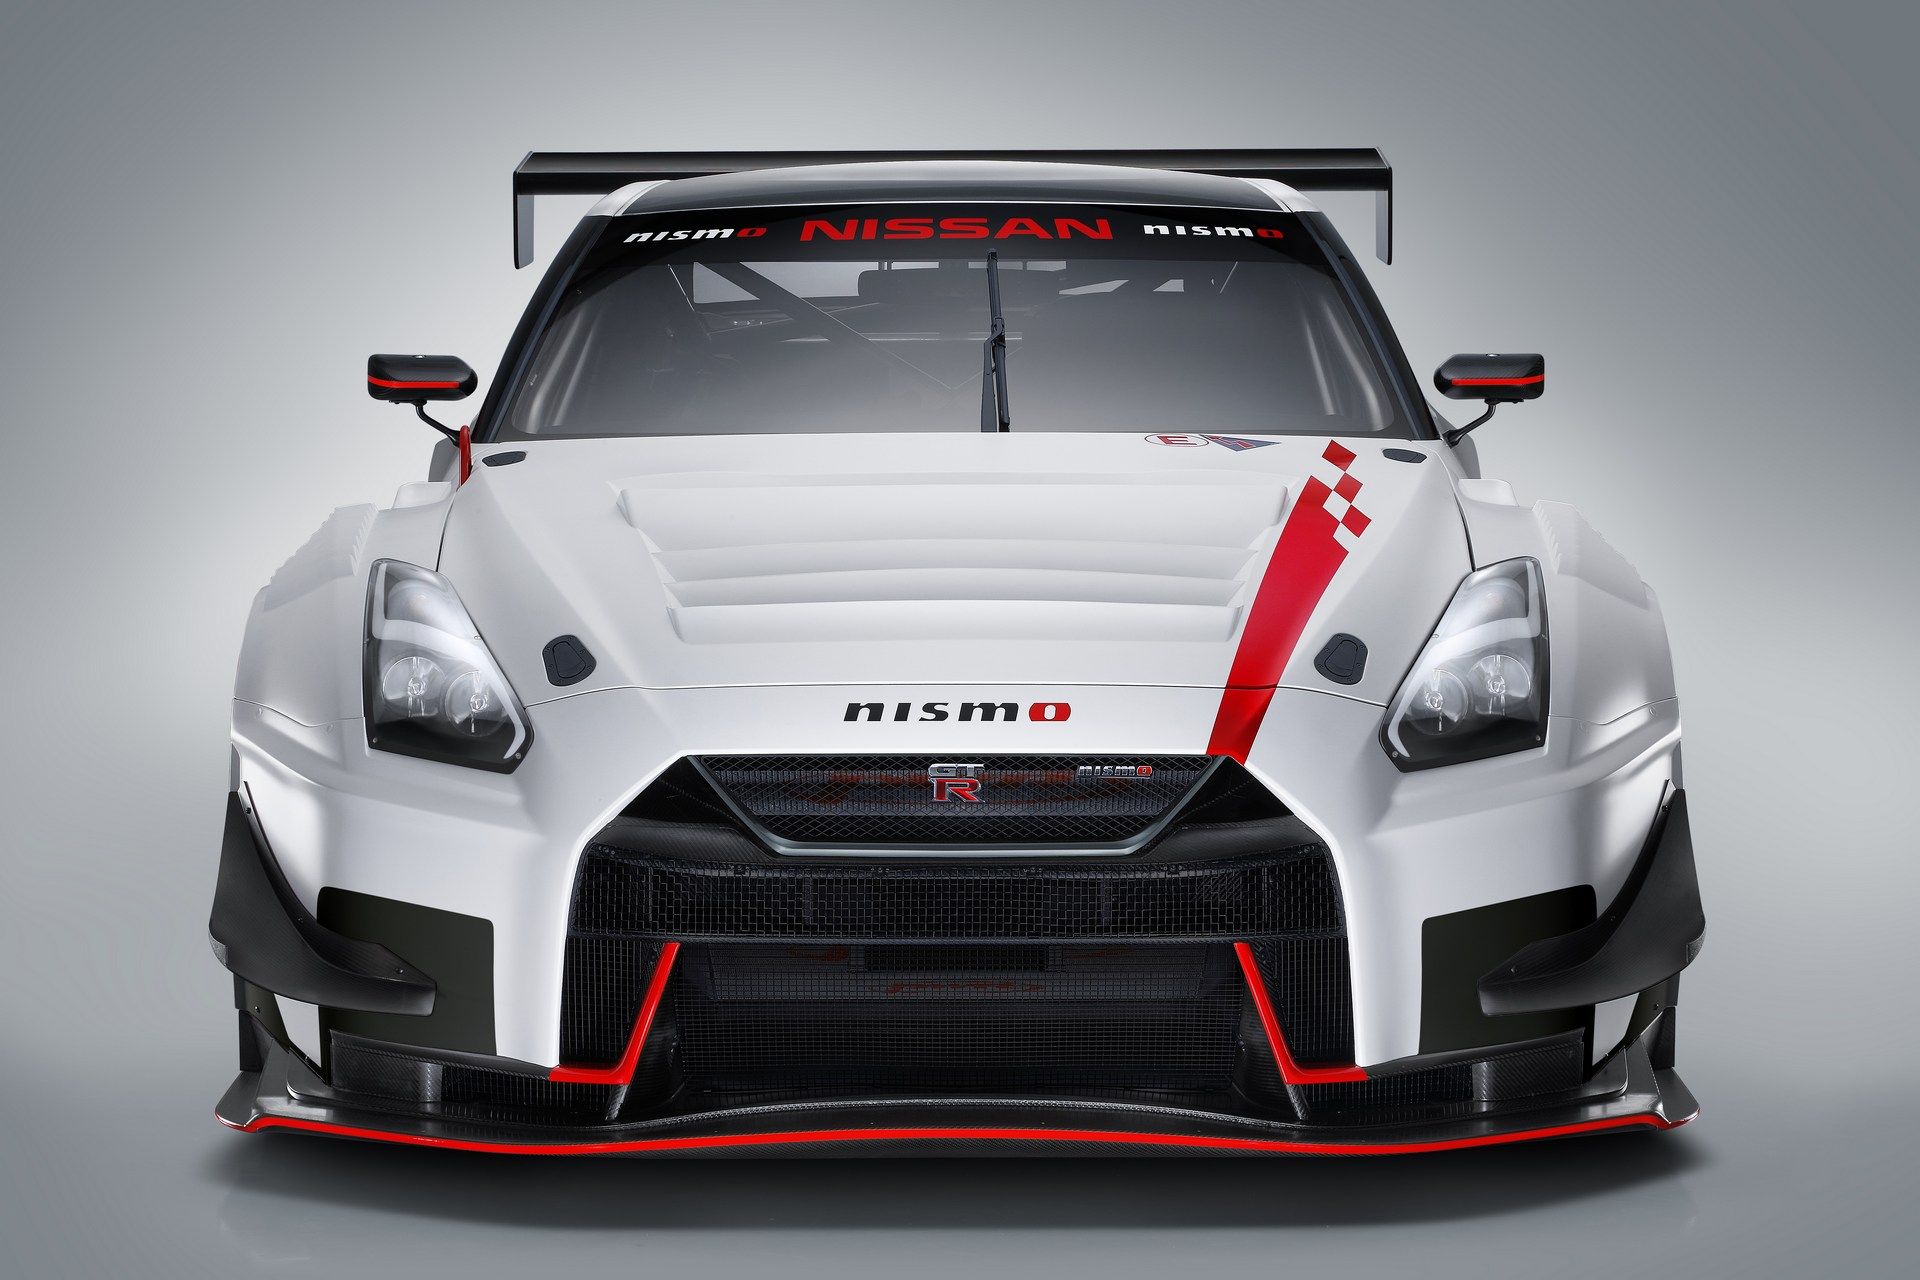 2018 Nissan GT R NISMO GT3 Unveiled With Performance Updates